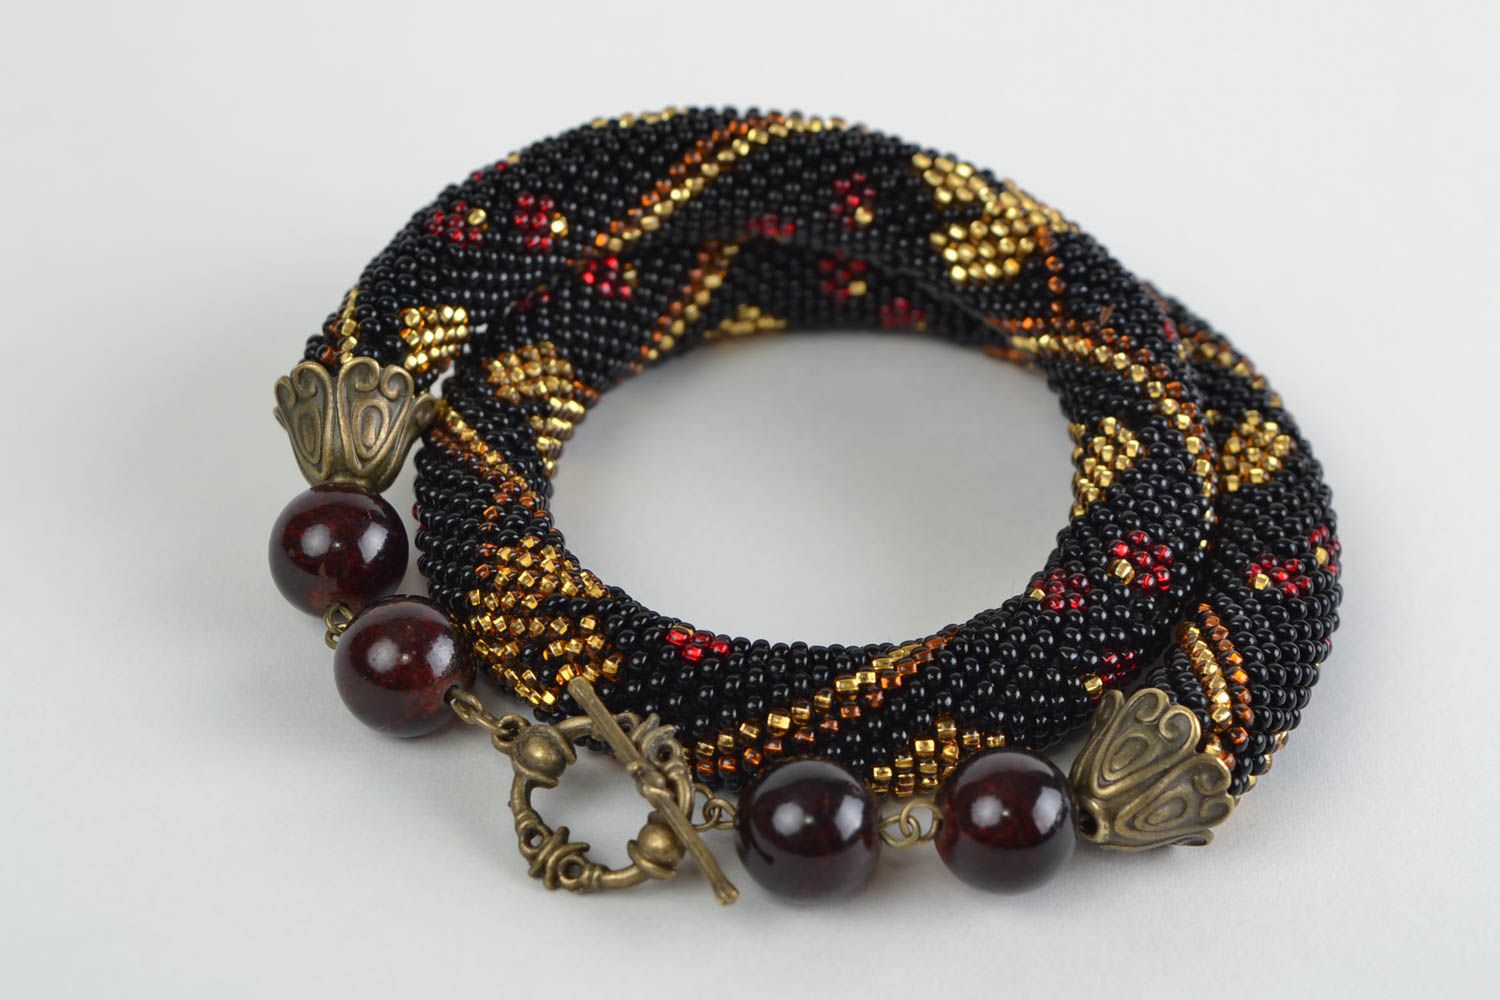 Beautiful handmade woven beaded cord necklace of black and golden colors women's photo 3